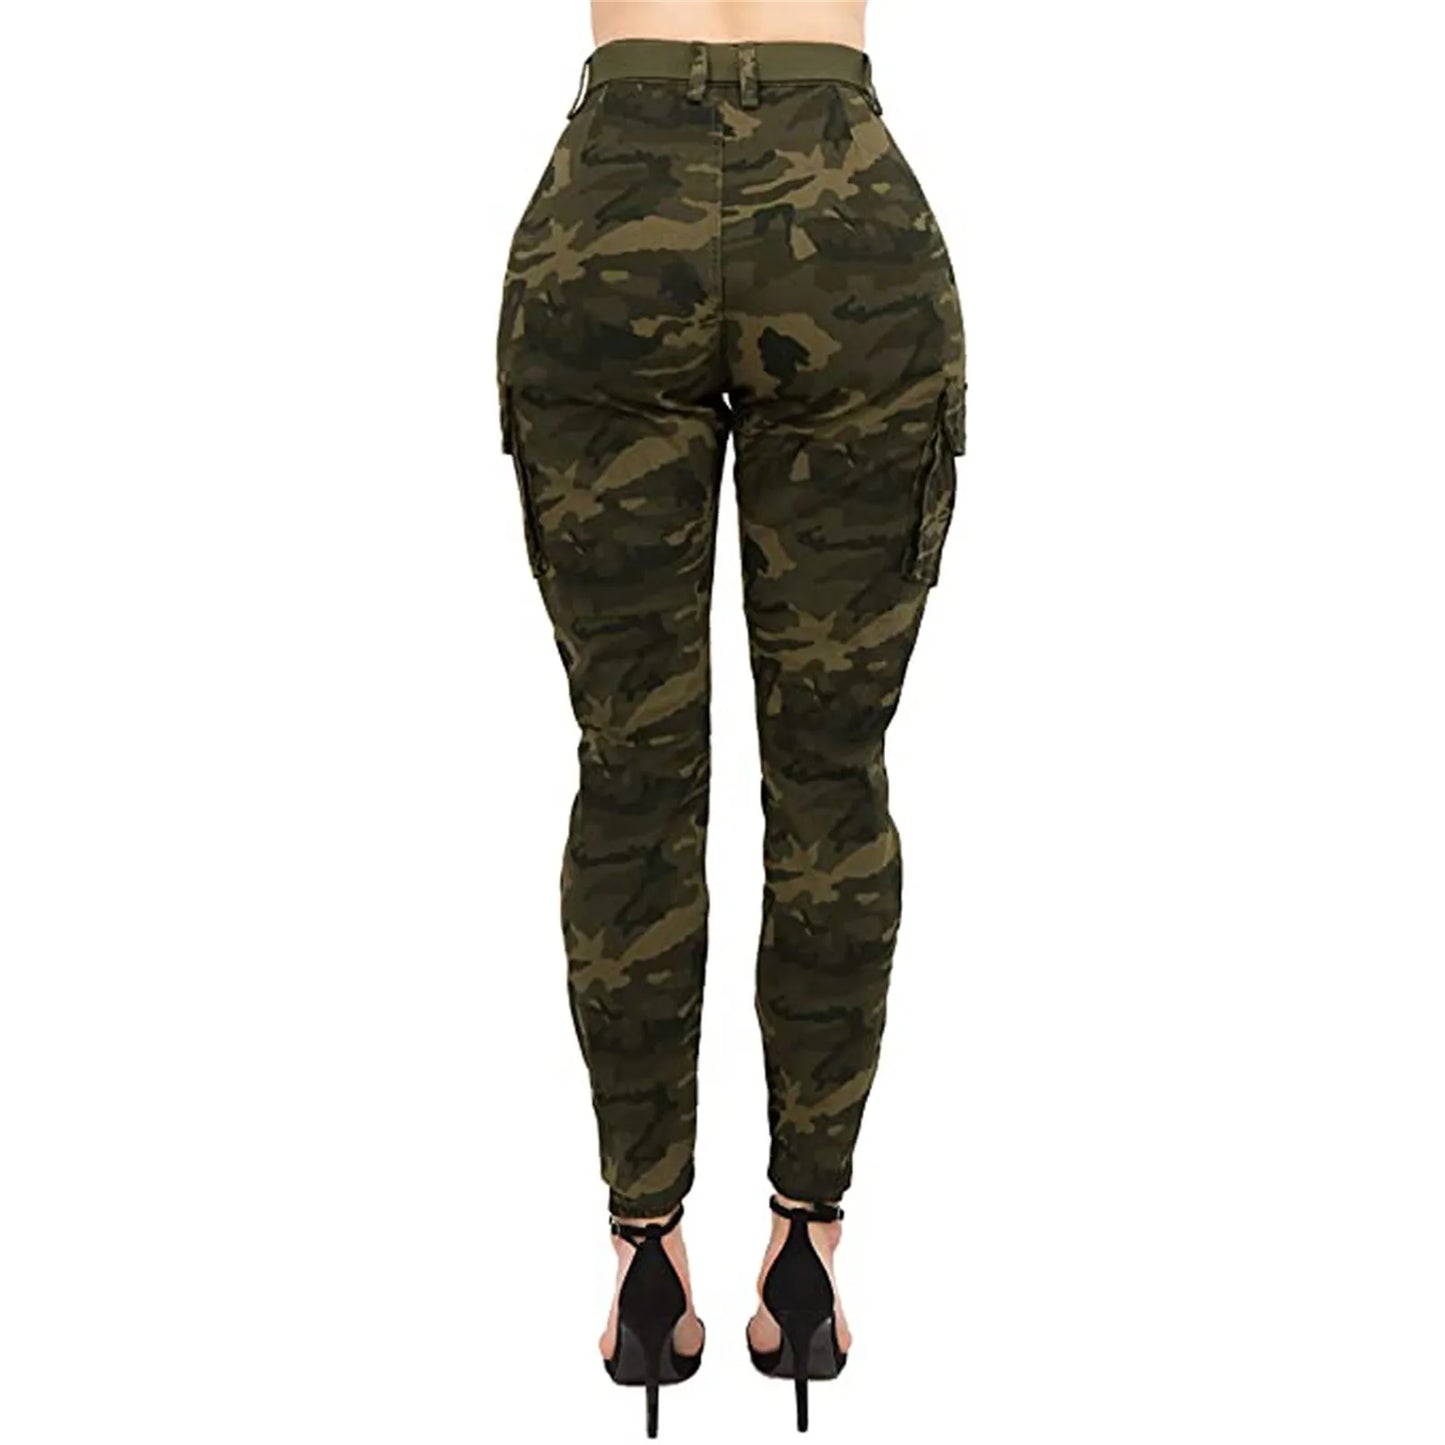 Cargo Camouflage Pants  With Matching Belt  High Waist Slim Fit Jogger Trousers